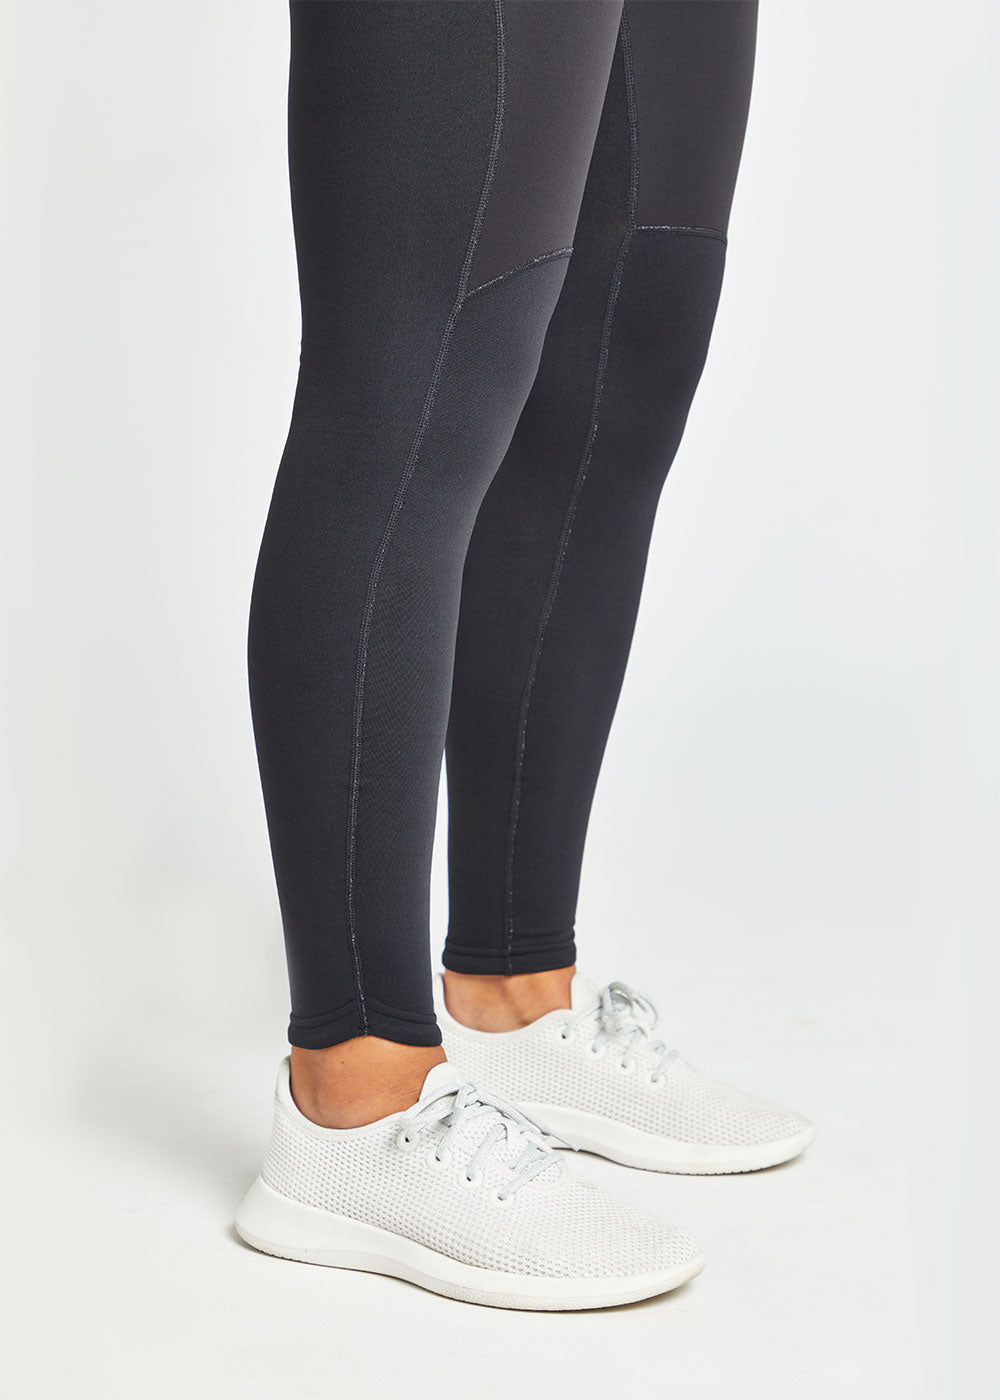 Wet Weather Conditions Volleyball Clothing Tights.